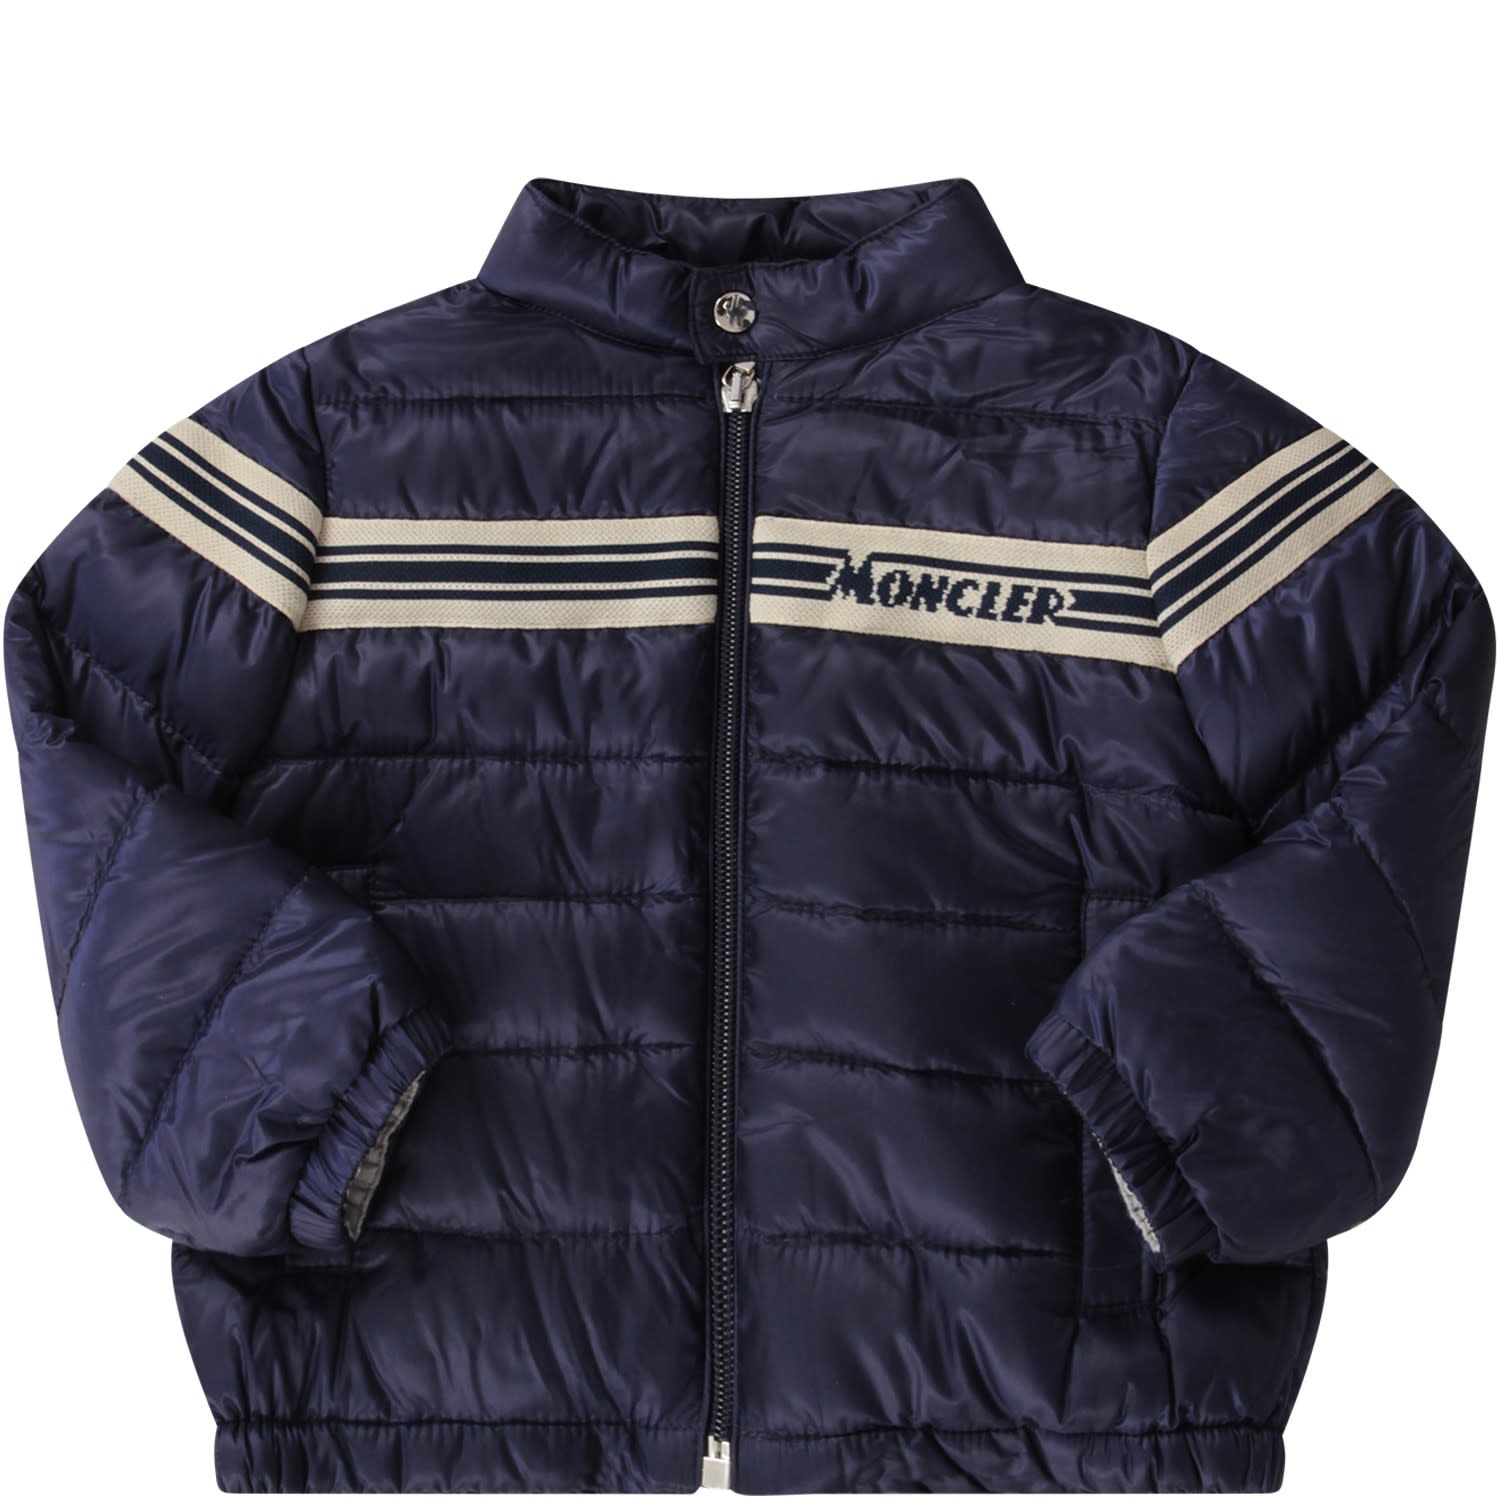 MONCLER BLUE JACKET FOR BABY BOY WITH BLUE LOGO,11223623